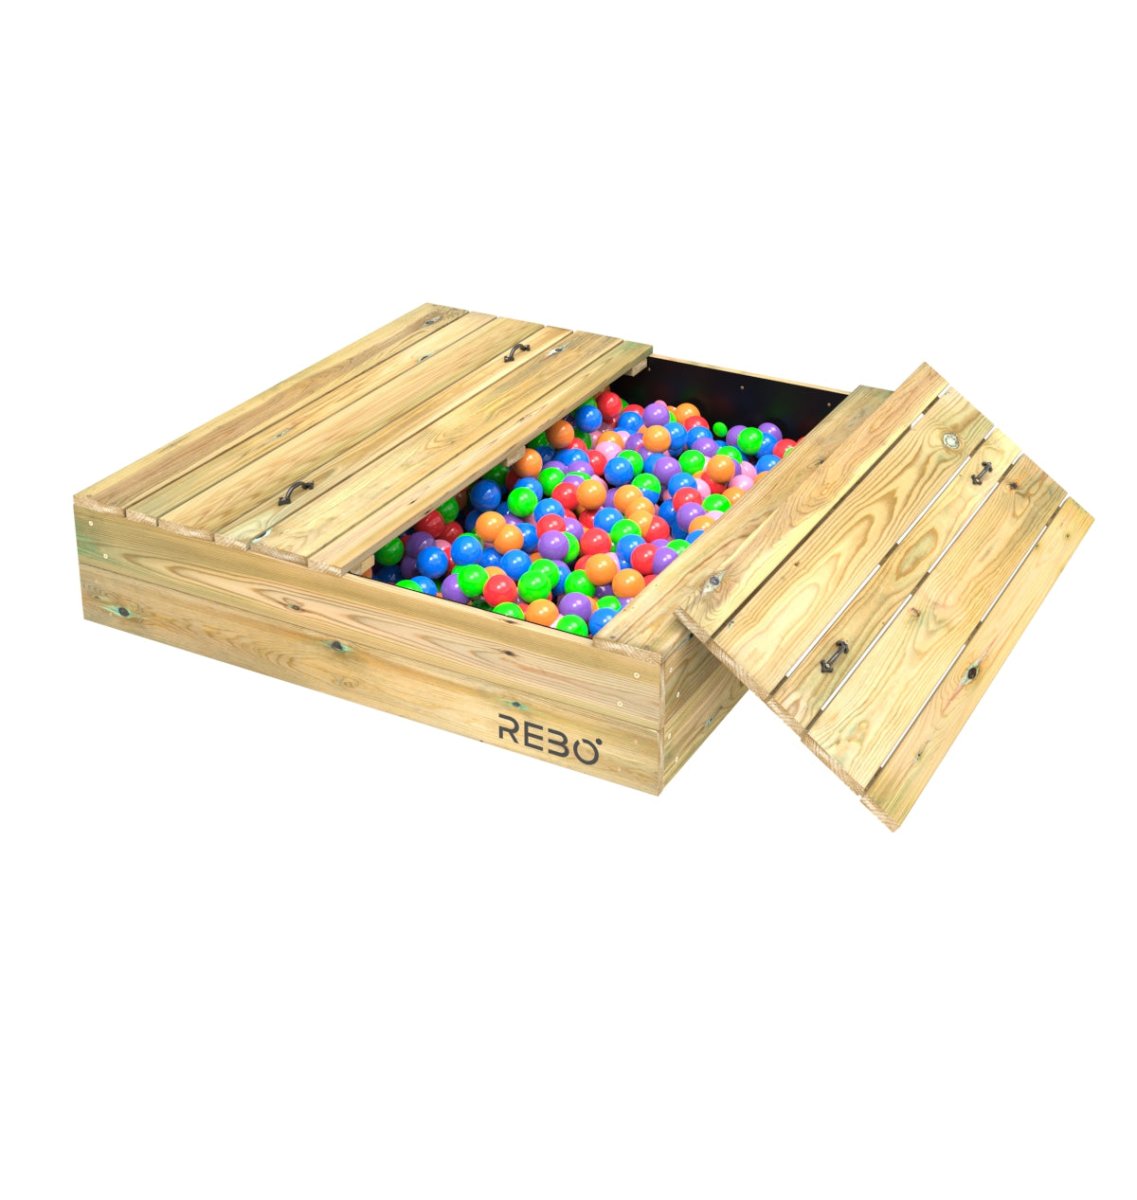 Rebo Wooden Sandpit Ball Pool with Removable Lid – 120cm x 120cm